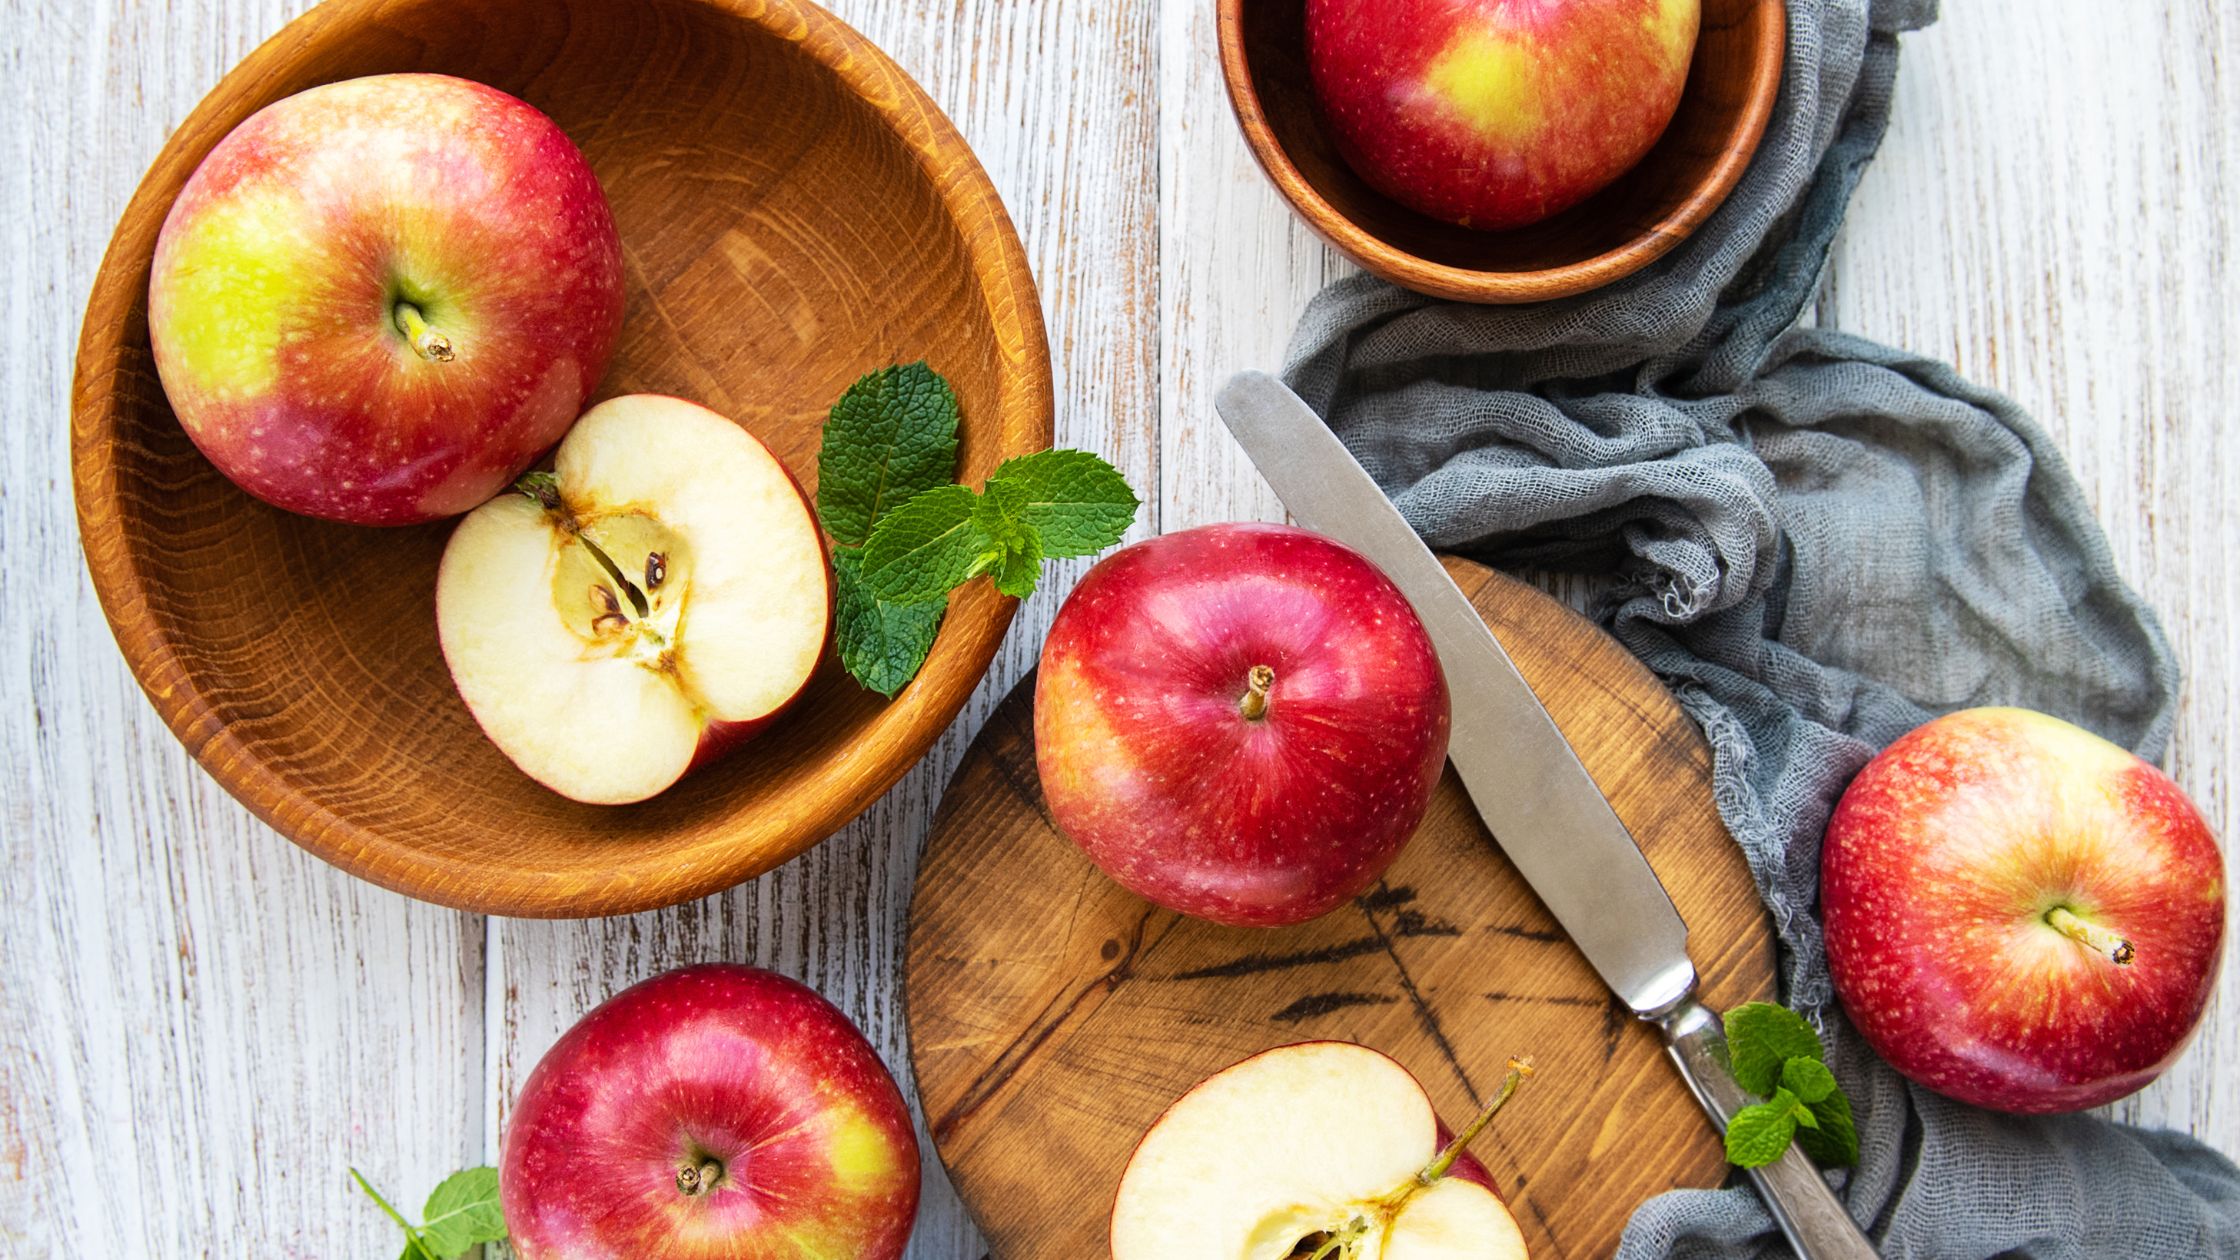 Apples – Crunch Your Way to Healthy Nutrition